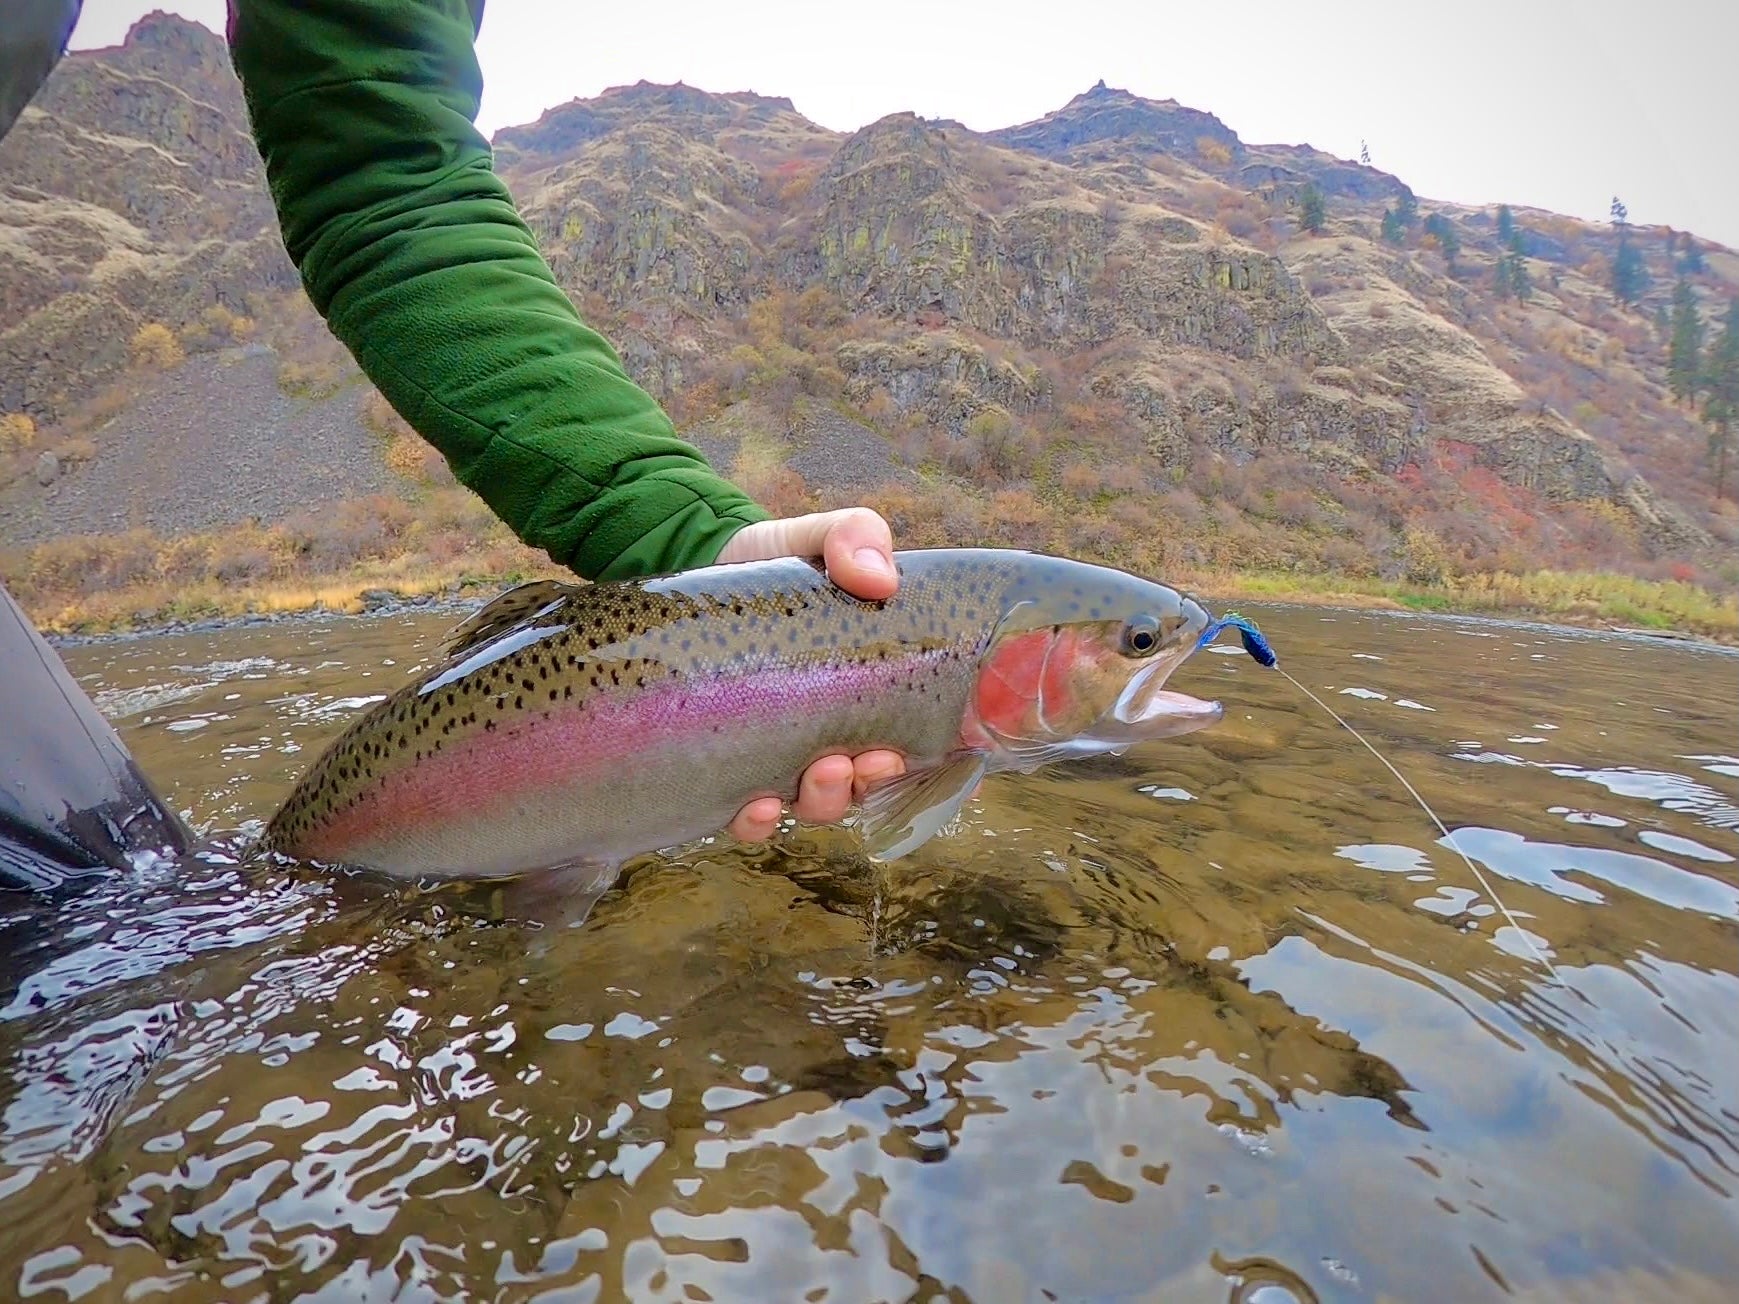 Load video: Lovely fish caught by Finn Prowess at one of his hot spots.